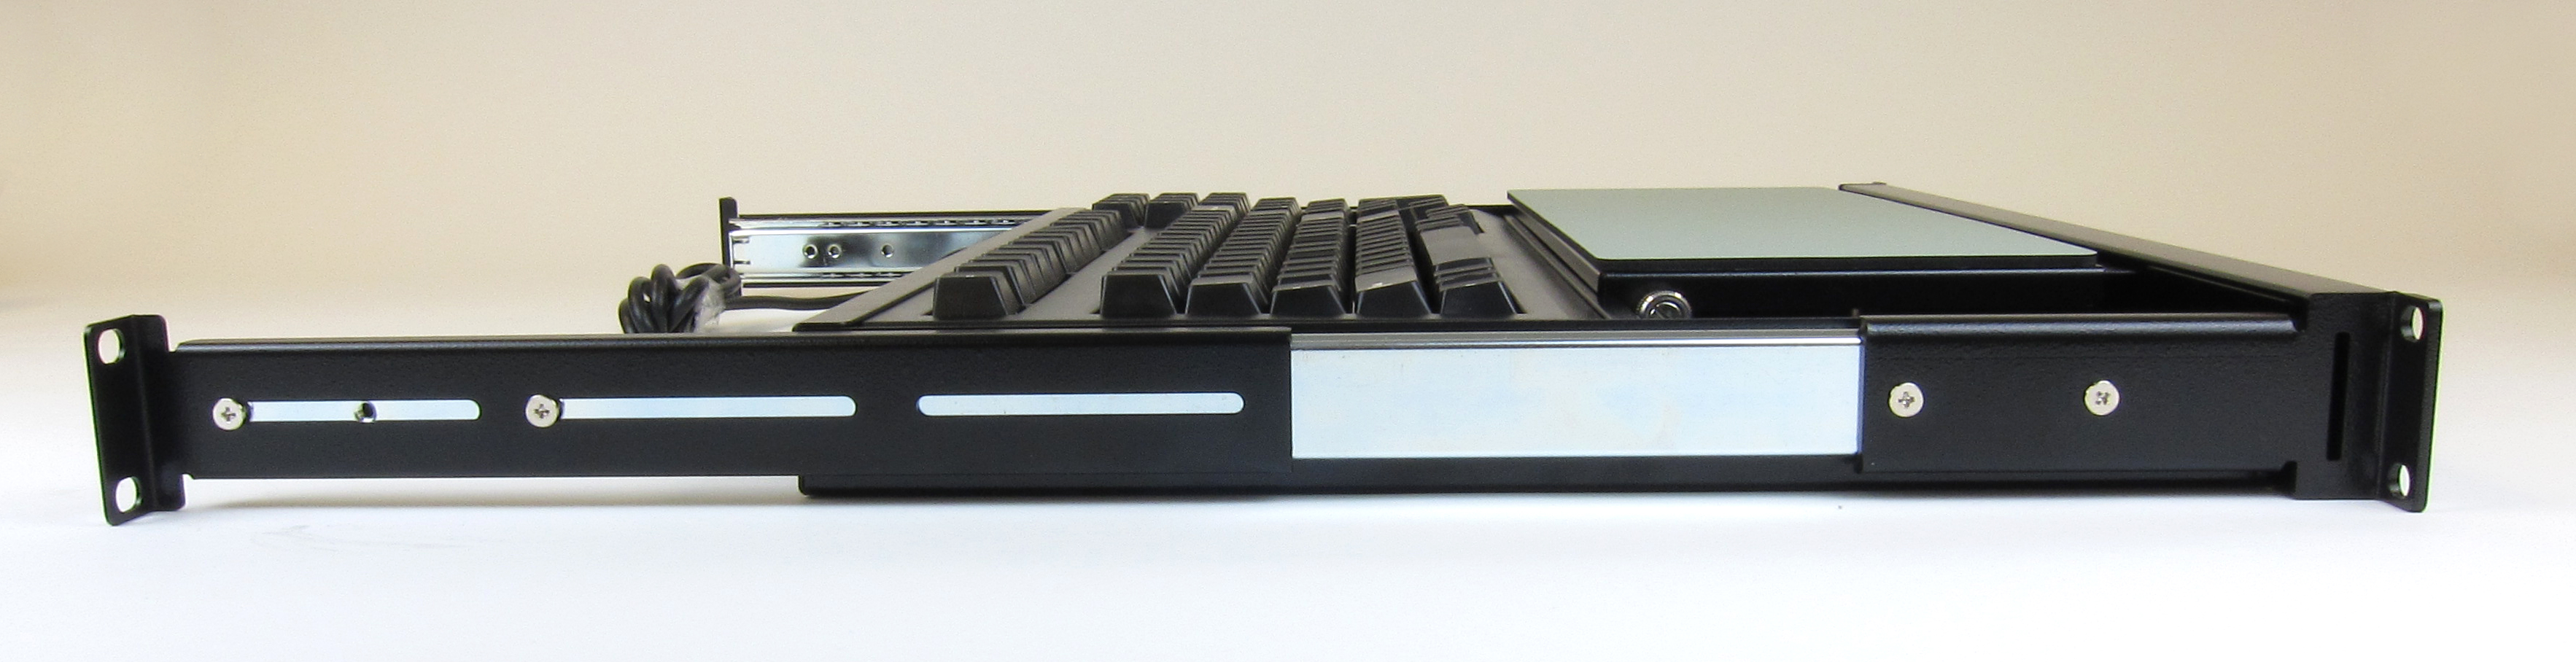 AD-624P-B 1U Rack Mount Keyboard with Mouse Pad Side